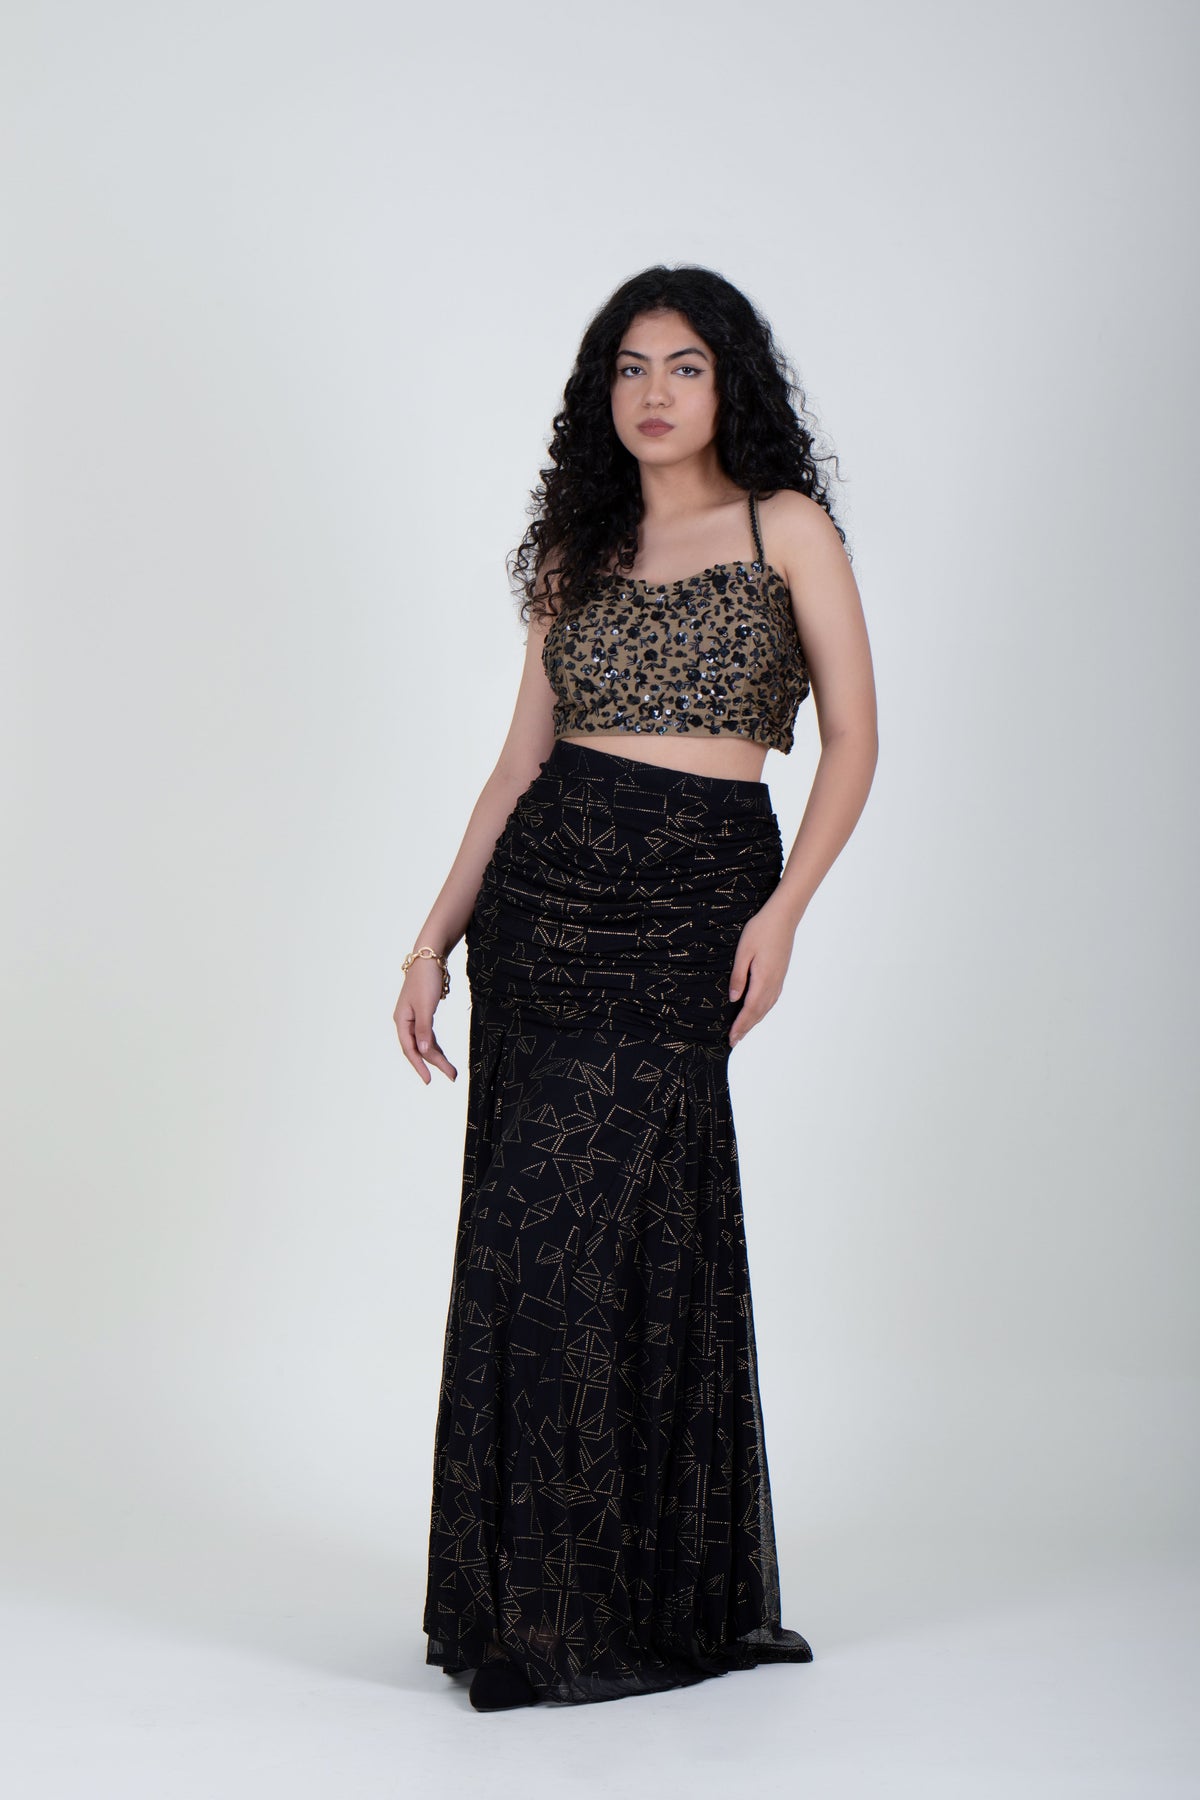 Black and Ochre-gold Two piece Dress (With Dupatta)